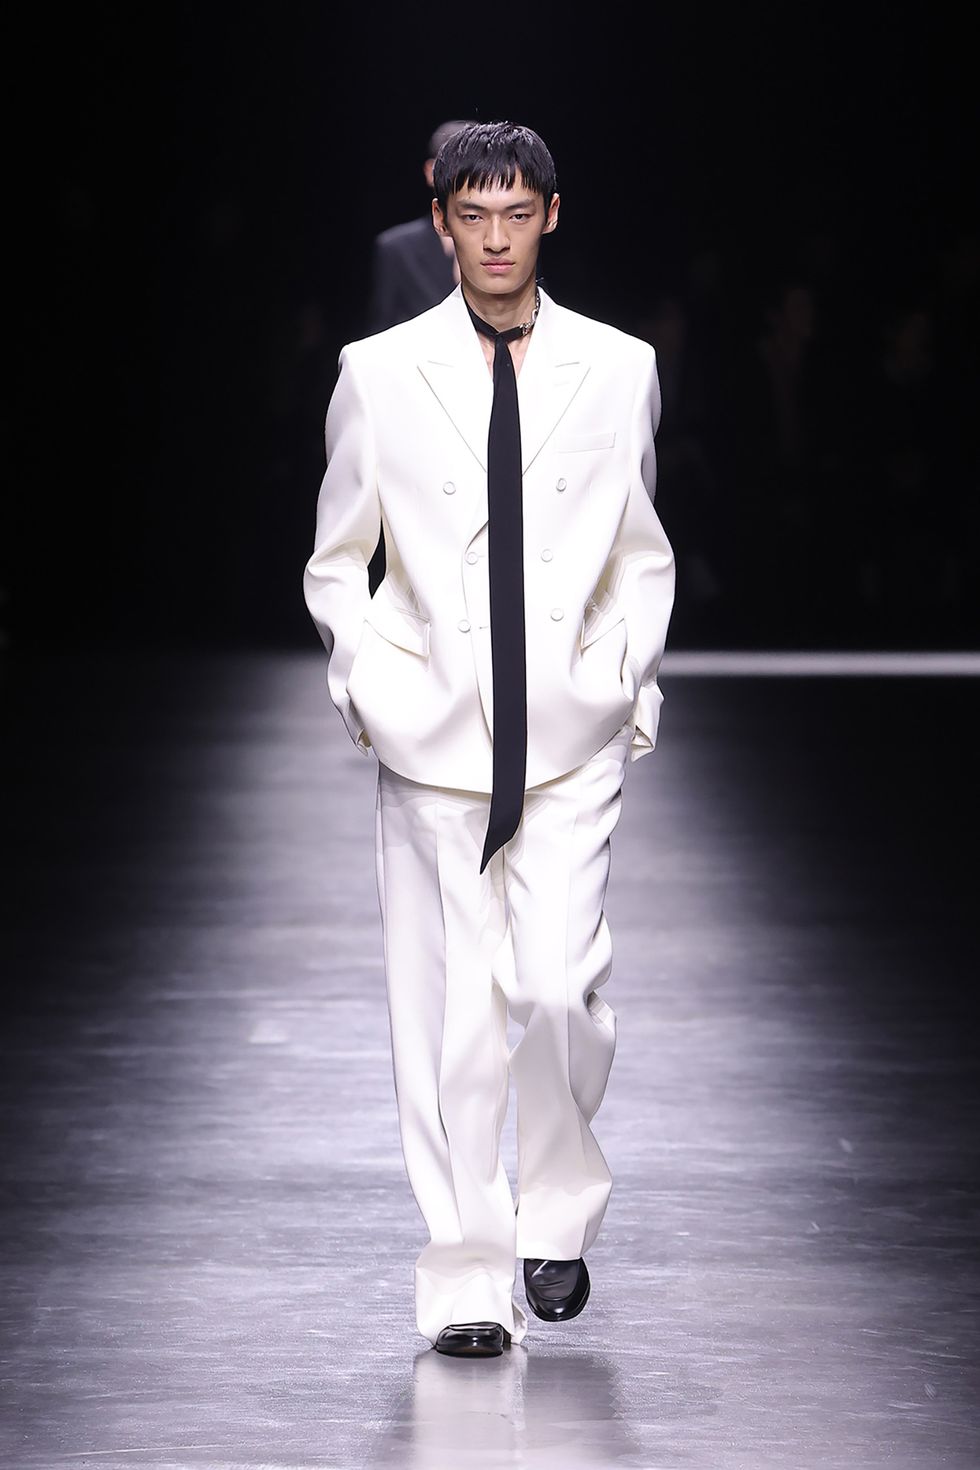 gucci show at milan mens fashion week a model wearing a white suit